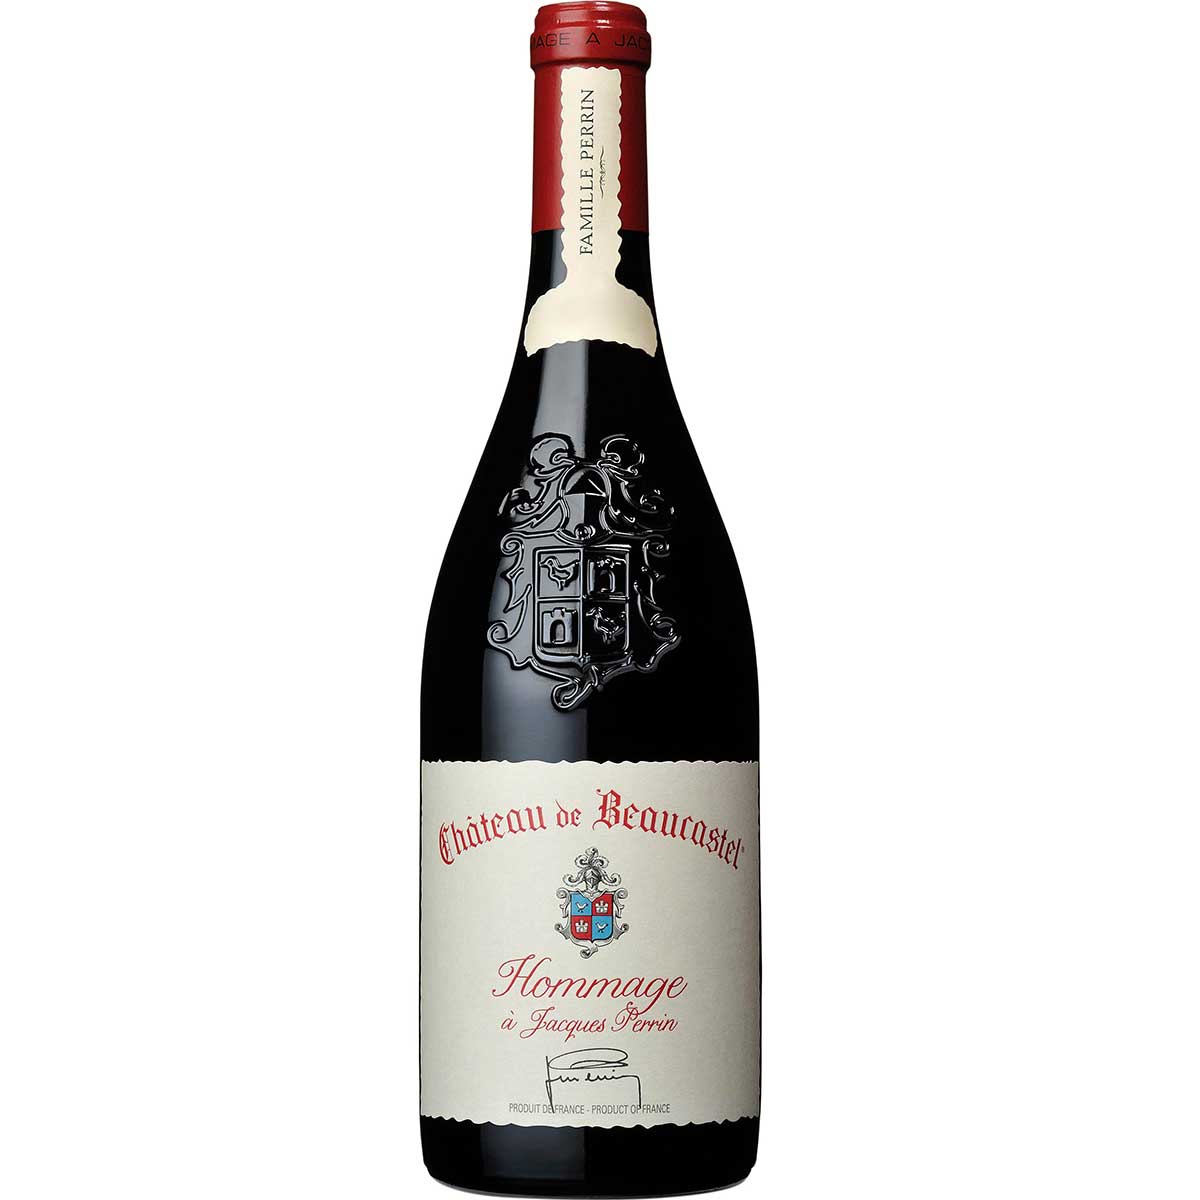 Beaucastel Chateauneuf du Pape Hommage a Jacques Perrin 2010